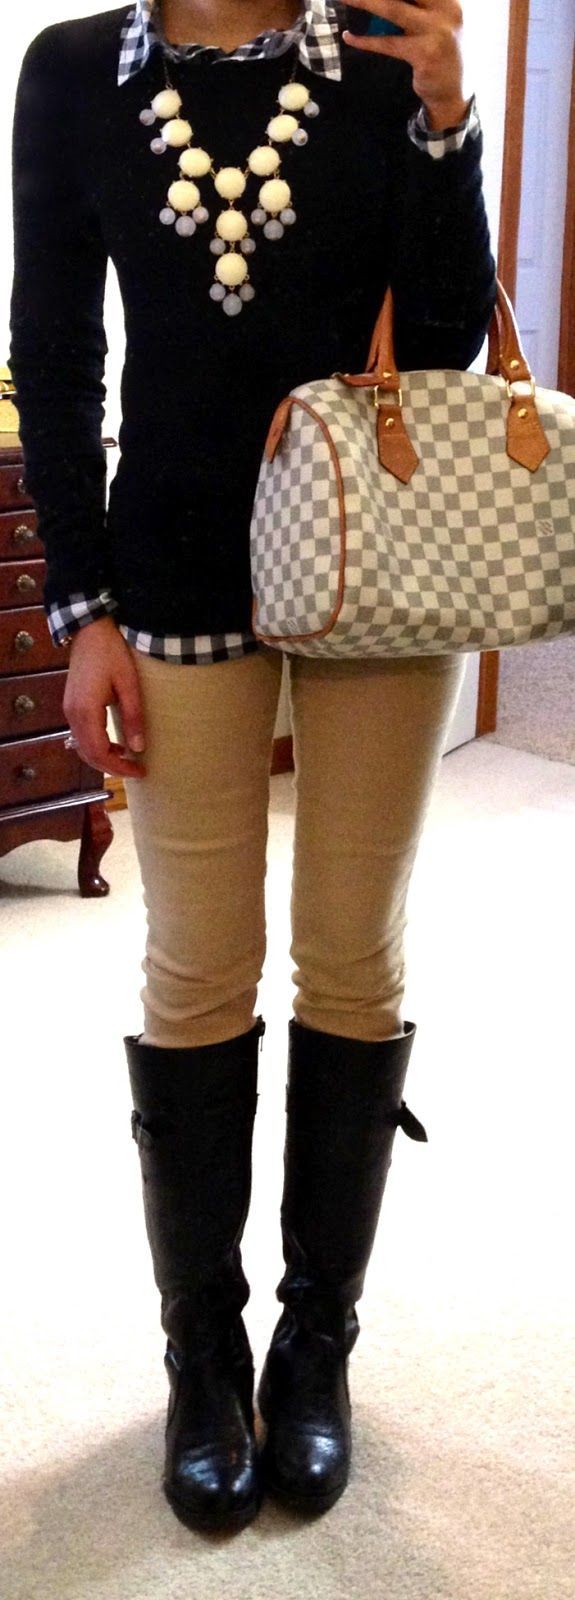 Check out this girls blog … she posts her work outfits and links where to get them.